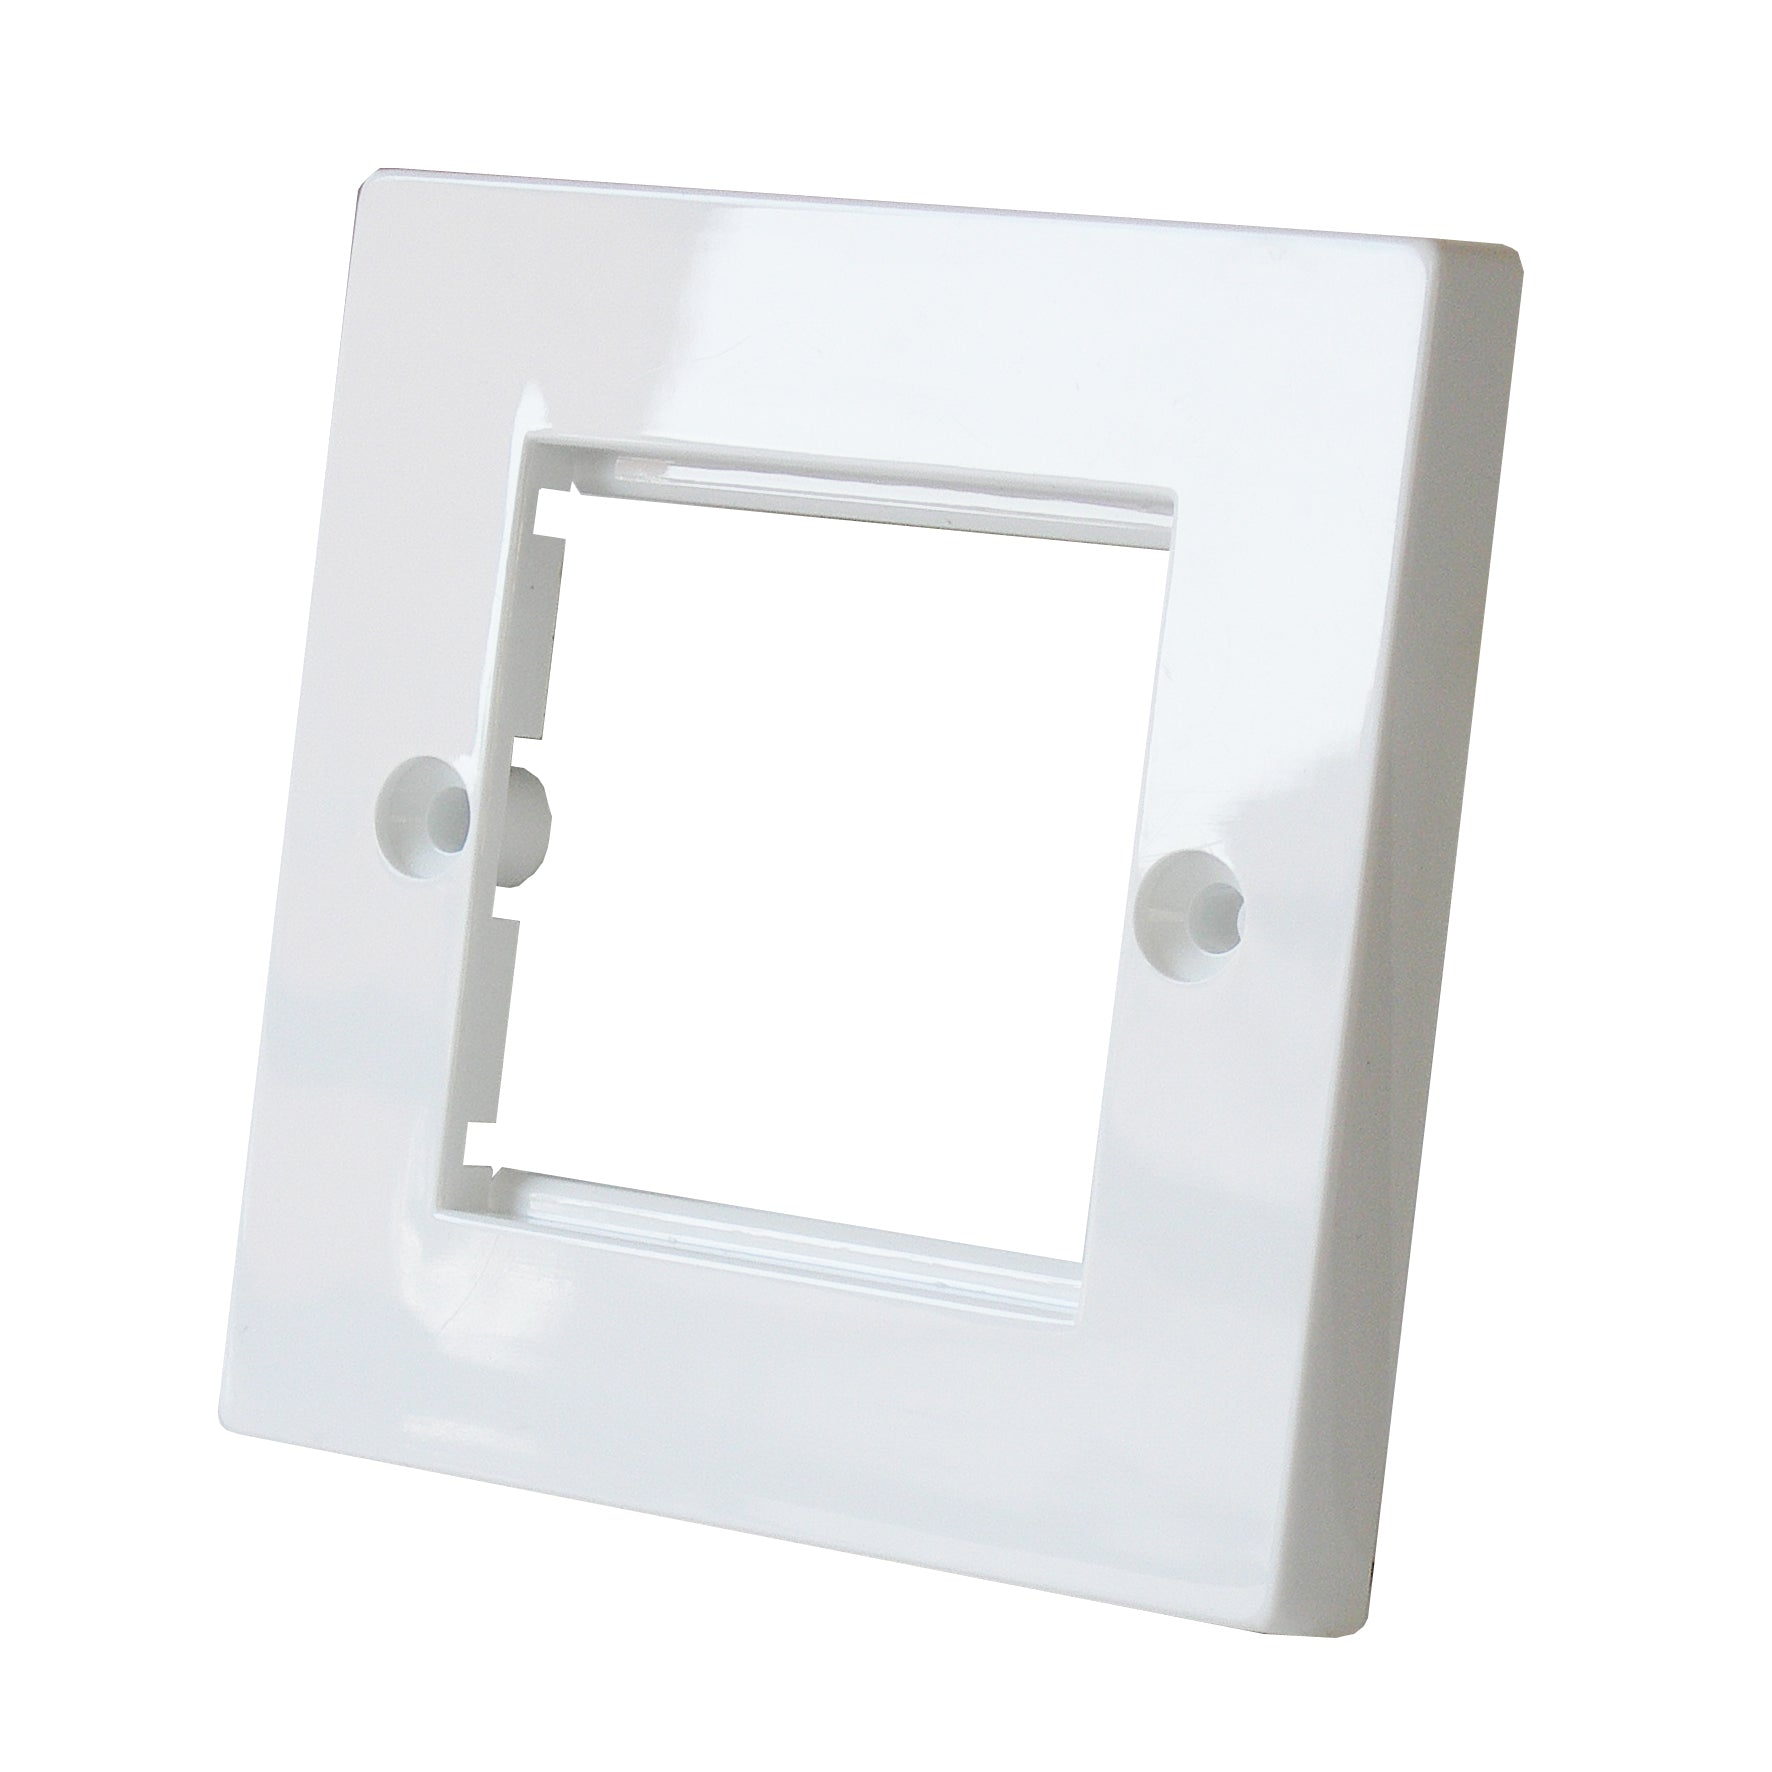 euromod faceplate single white front